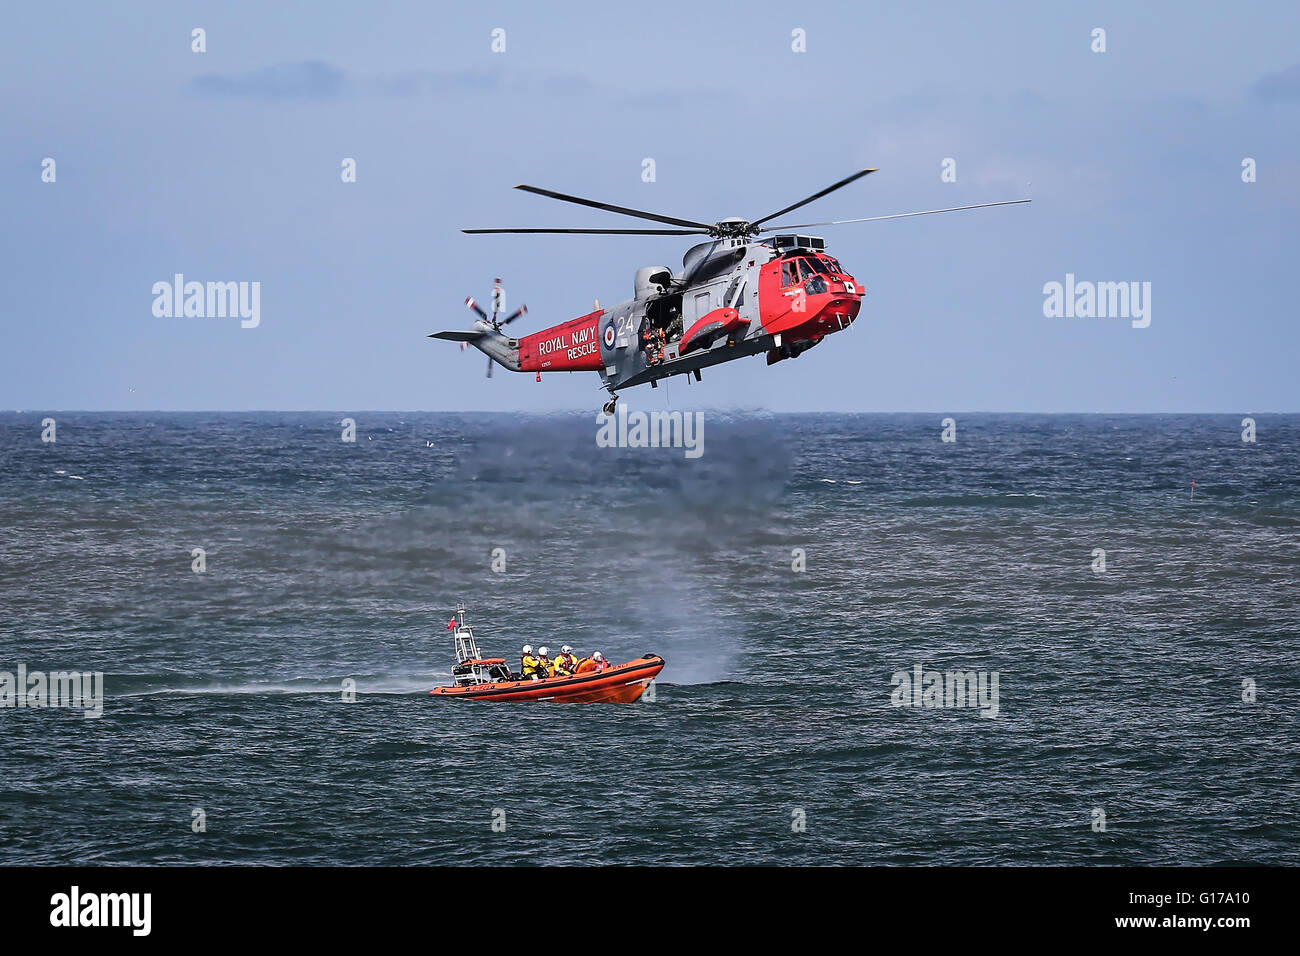 Helicopter performs rescue mission during air show Stock Photo